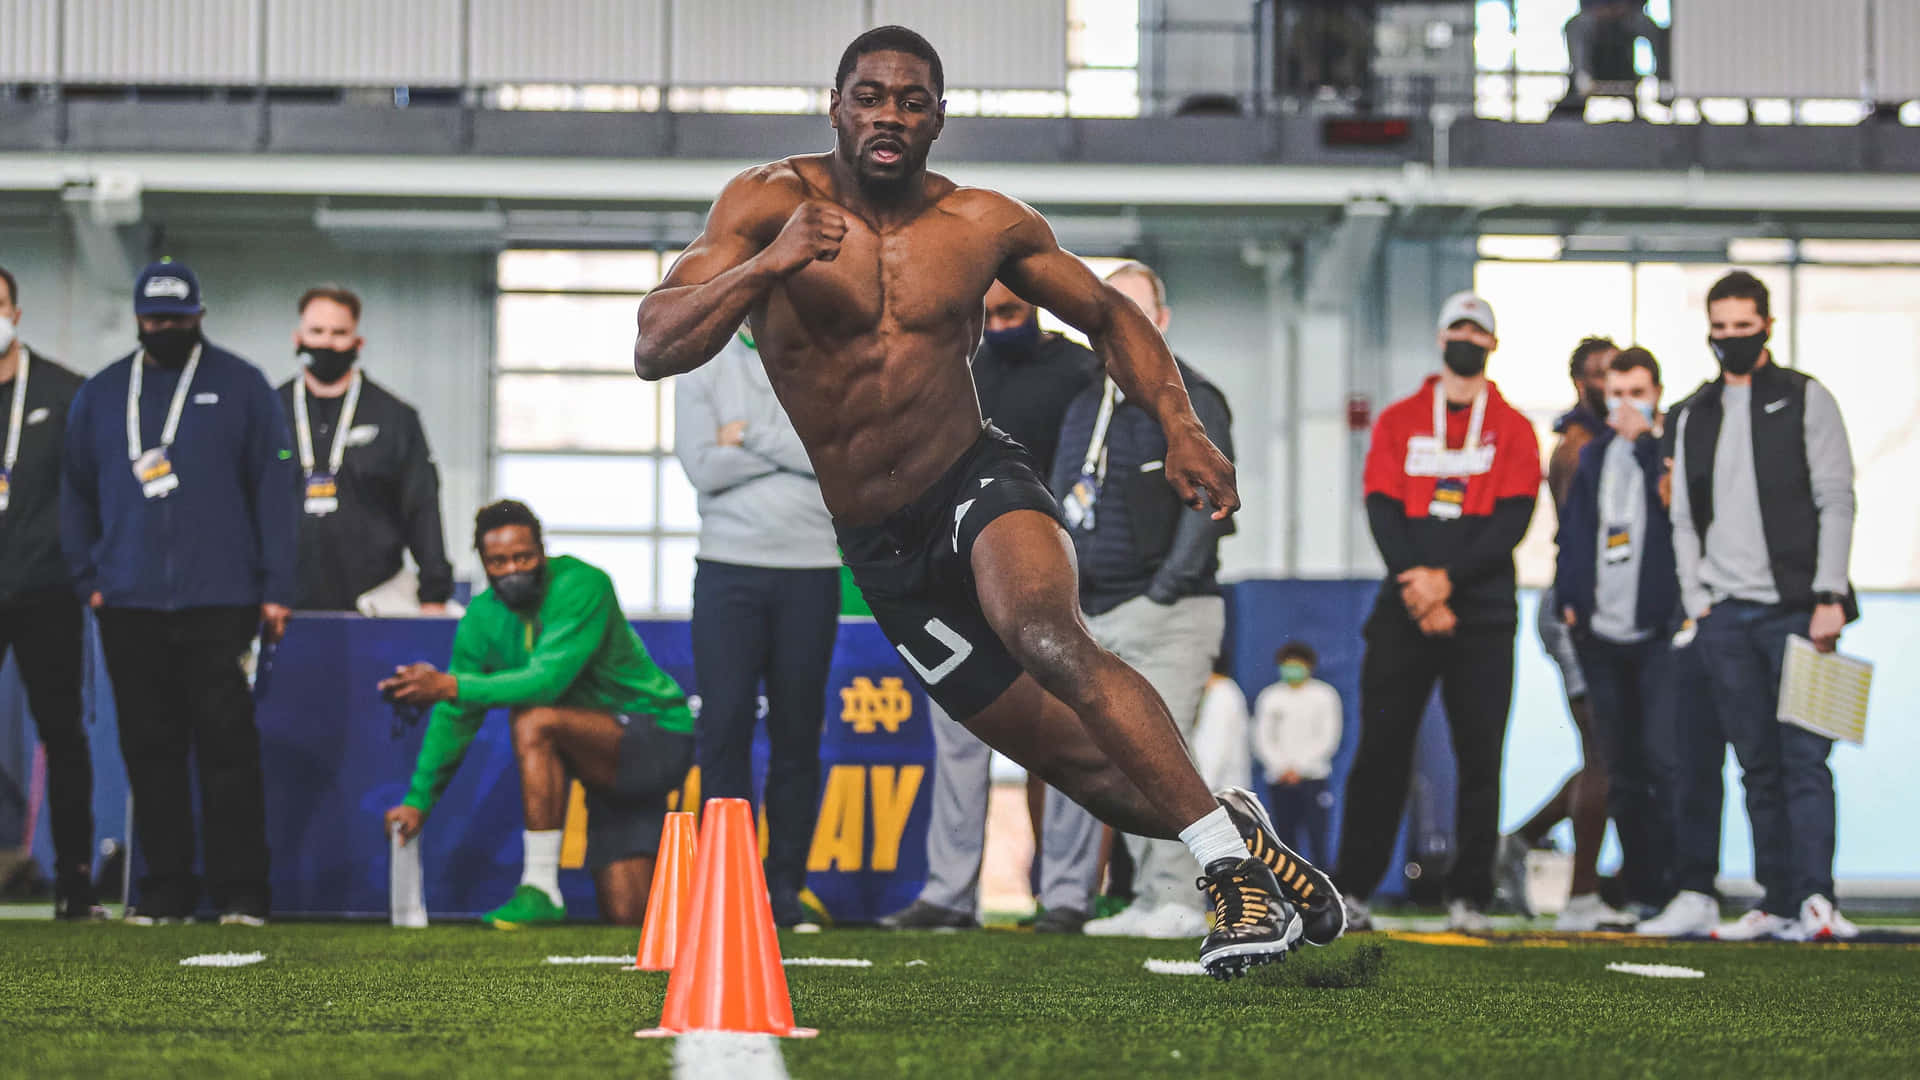 Athlete Performance During Combine Drill Wallpaper